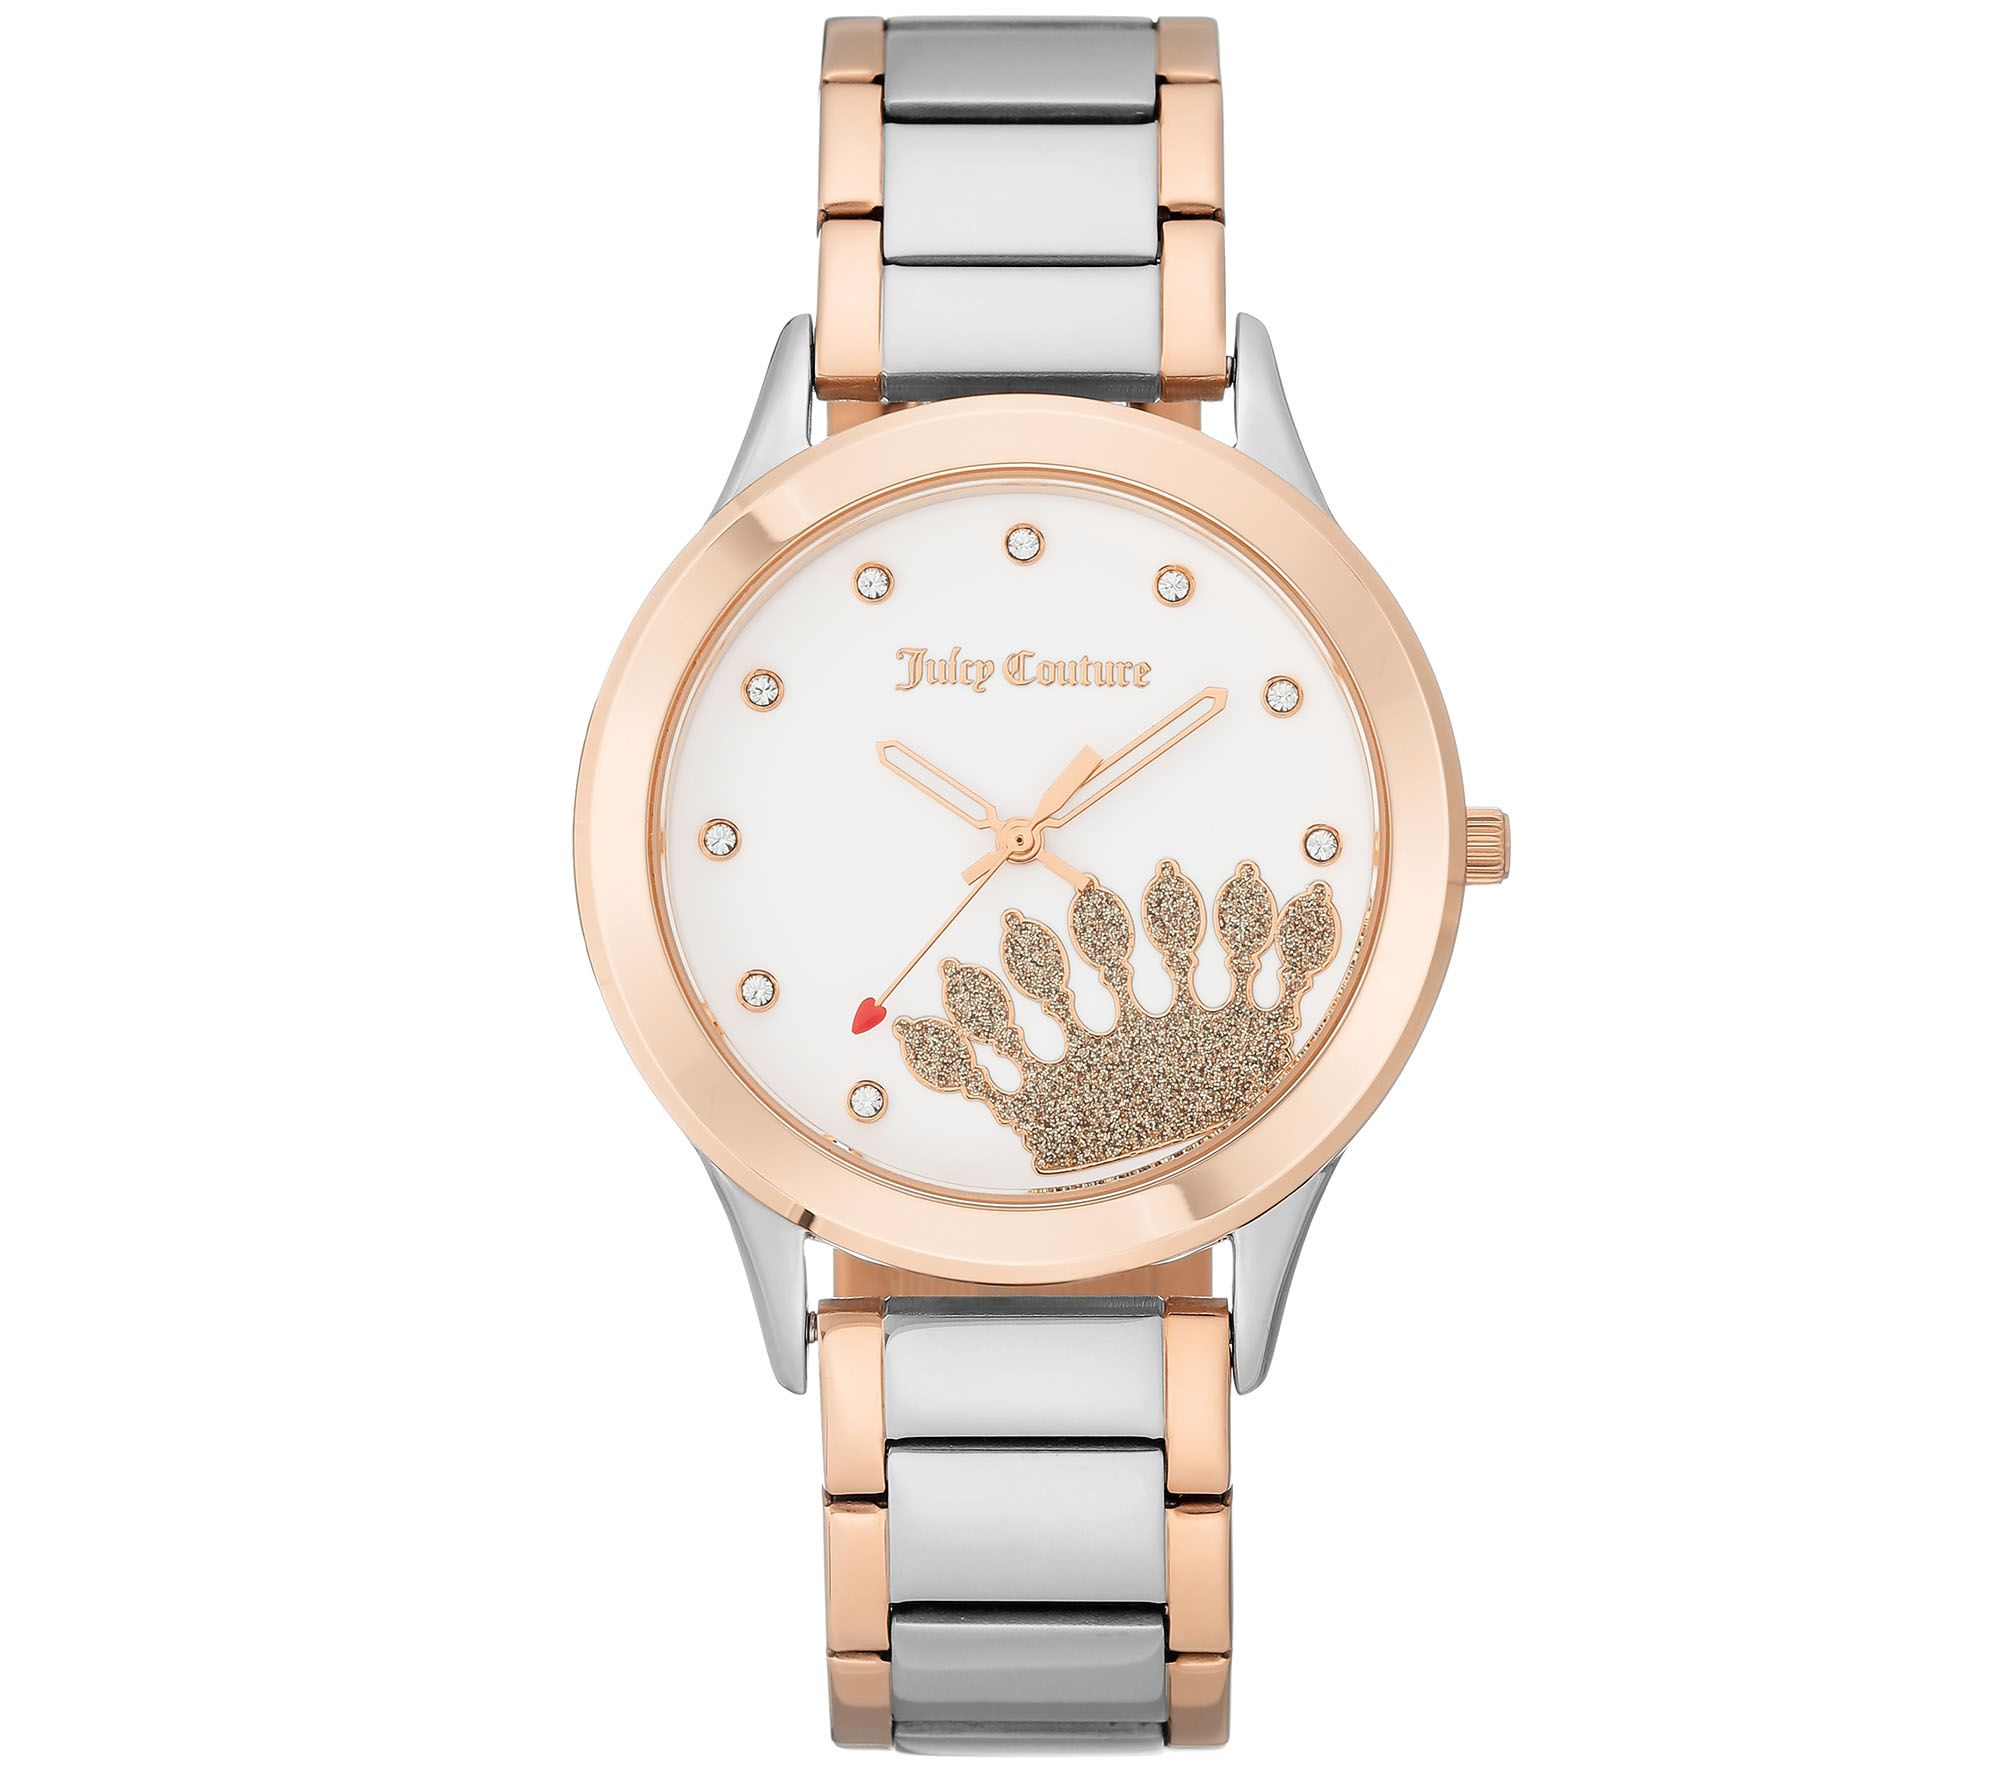 Juicy Couture Two-Tone Watch w/ White Dial - QVC.com